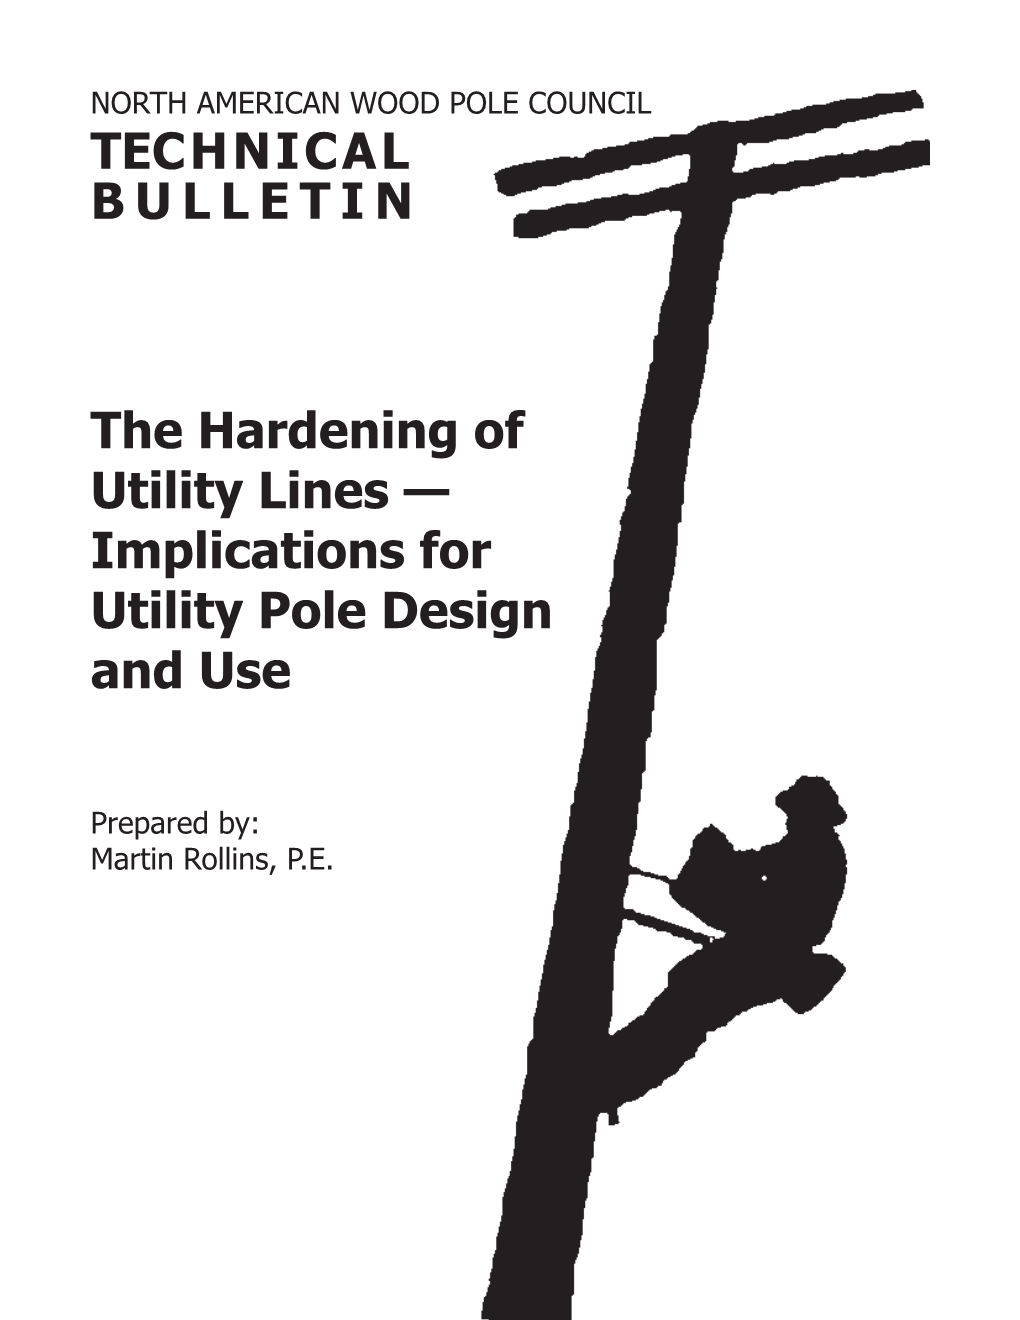 Hardening of Utility Lines — Implications for Utility Pole Design and Use